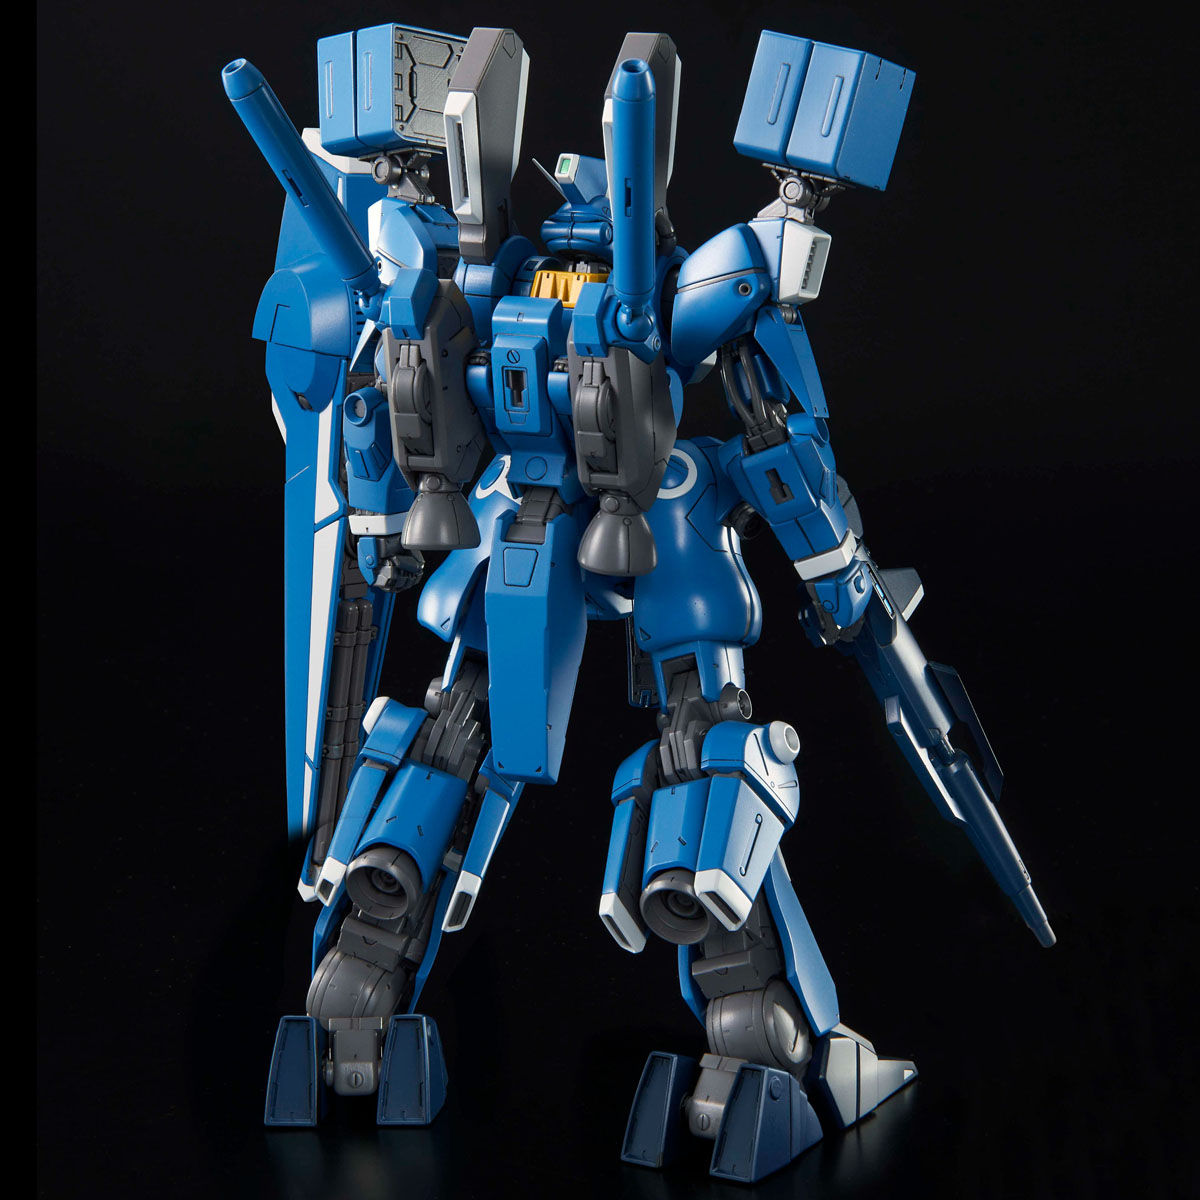 Mg 1 100 Gundam Mk V May 21 Delivery Gundam Premium Bandai Singapore Online Store For Action Figures Model Kits Toys And More